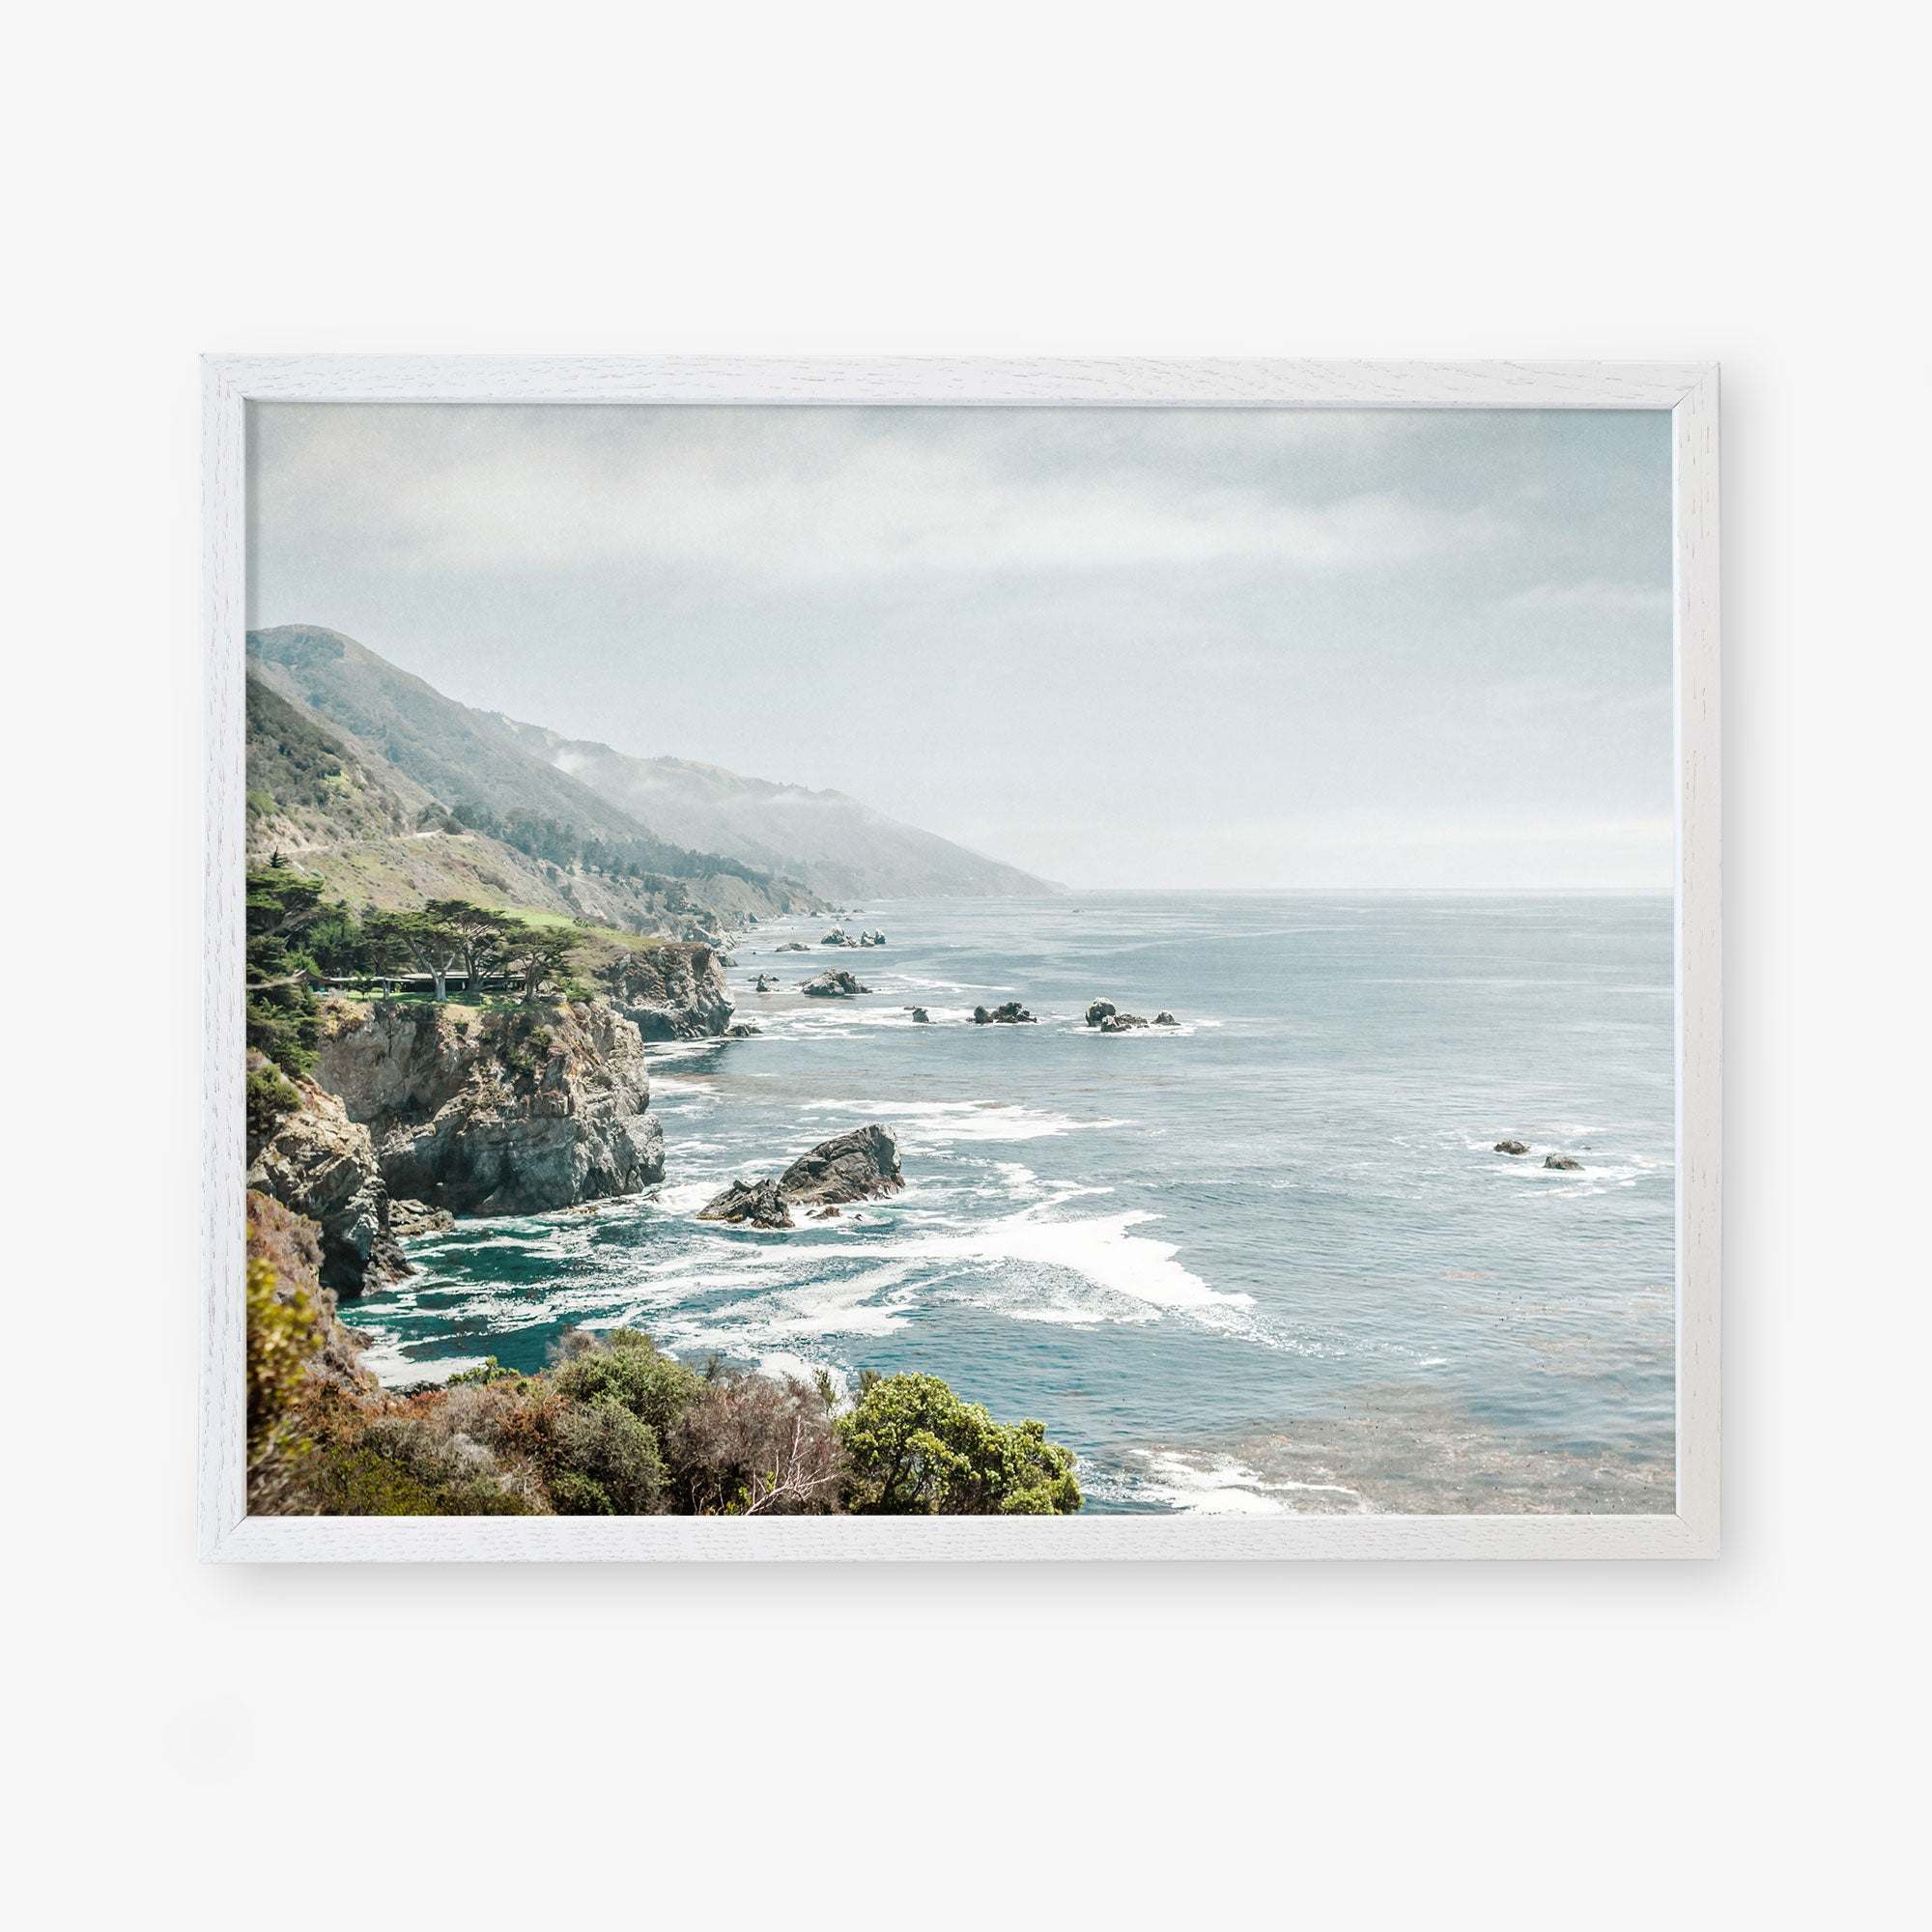 Framed artwork of a serene coastal landscape along California Highway 1, featuring rocky cliffs and a misty ocean extending into the distance under a soft, hazy sky by Offley Green&#39;s Big Sur Landscape Print, &#39;Rocky Rocks&#39;.